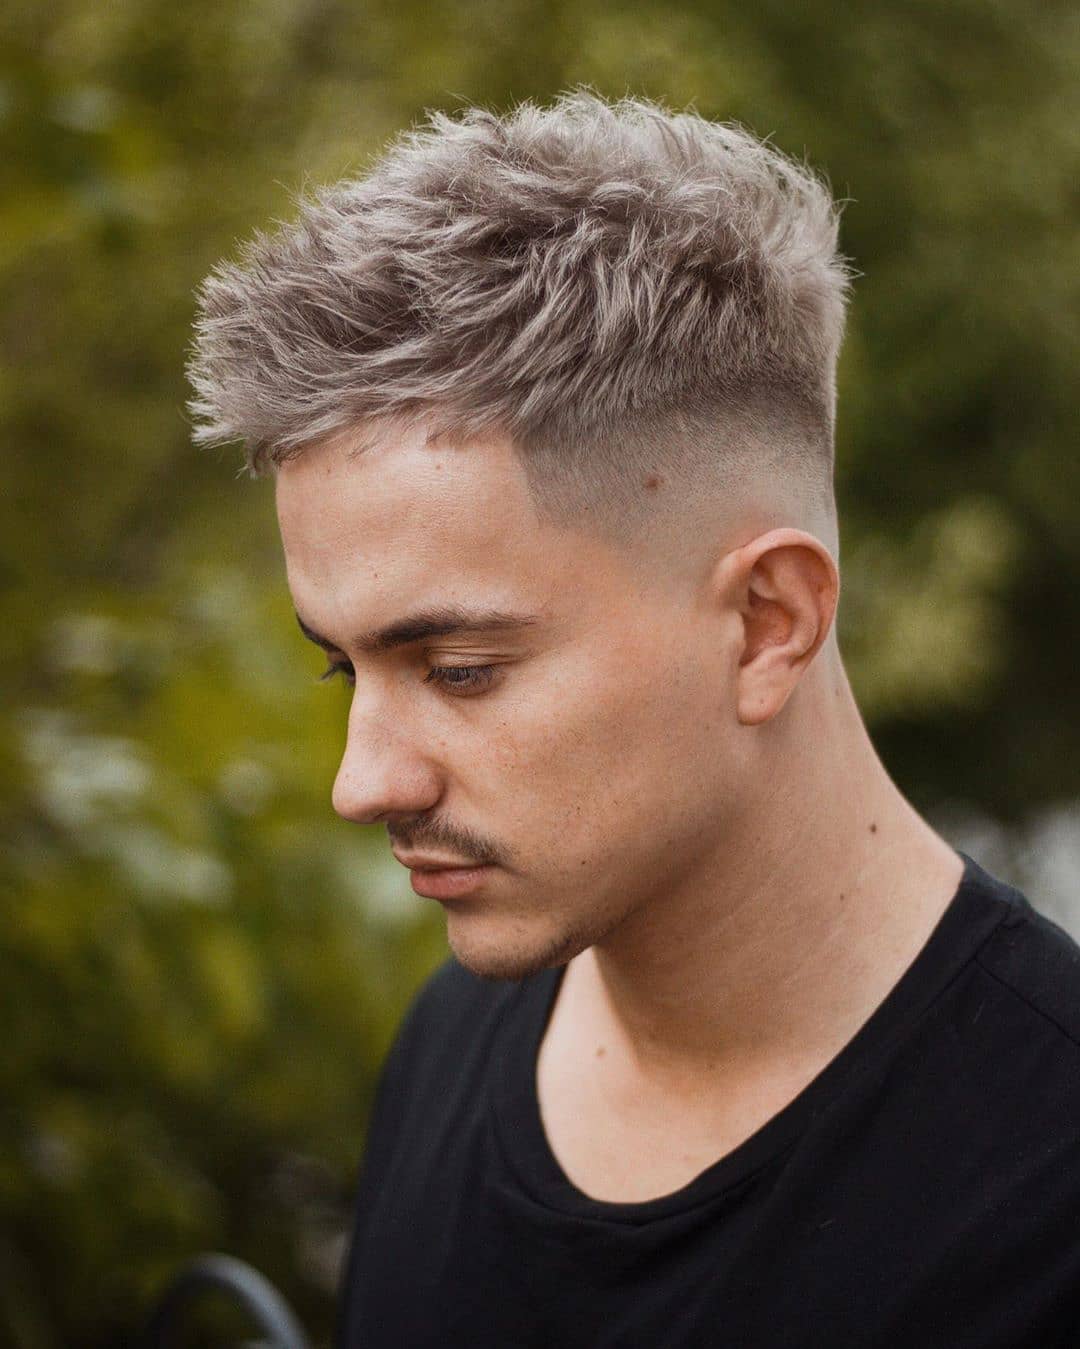 2017 Men's Hairstyle Trends for 2017 – Hairs2017